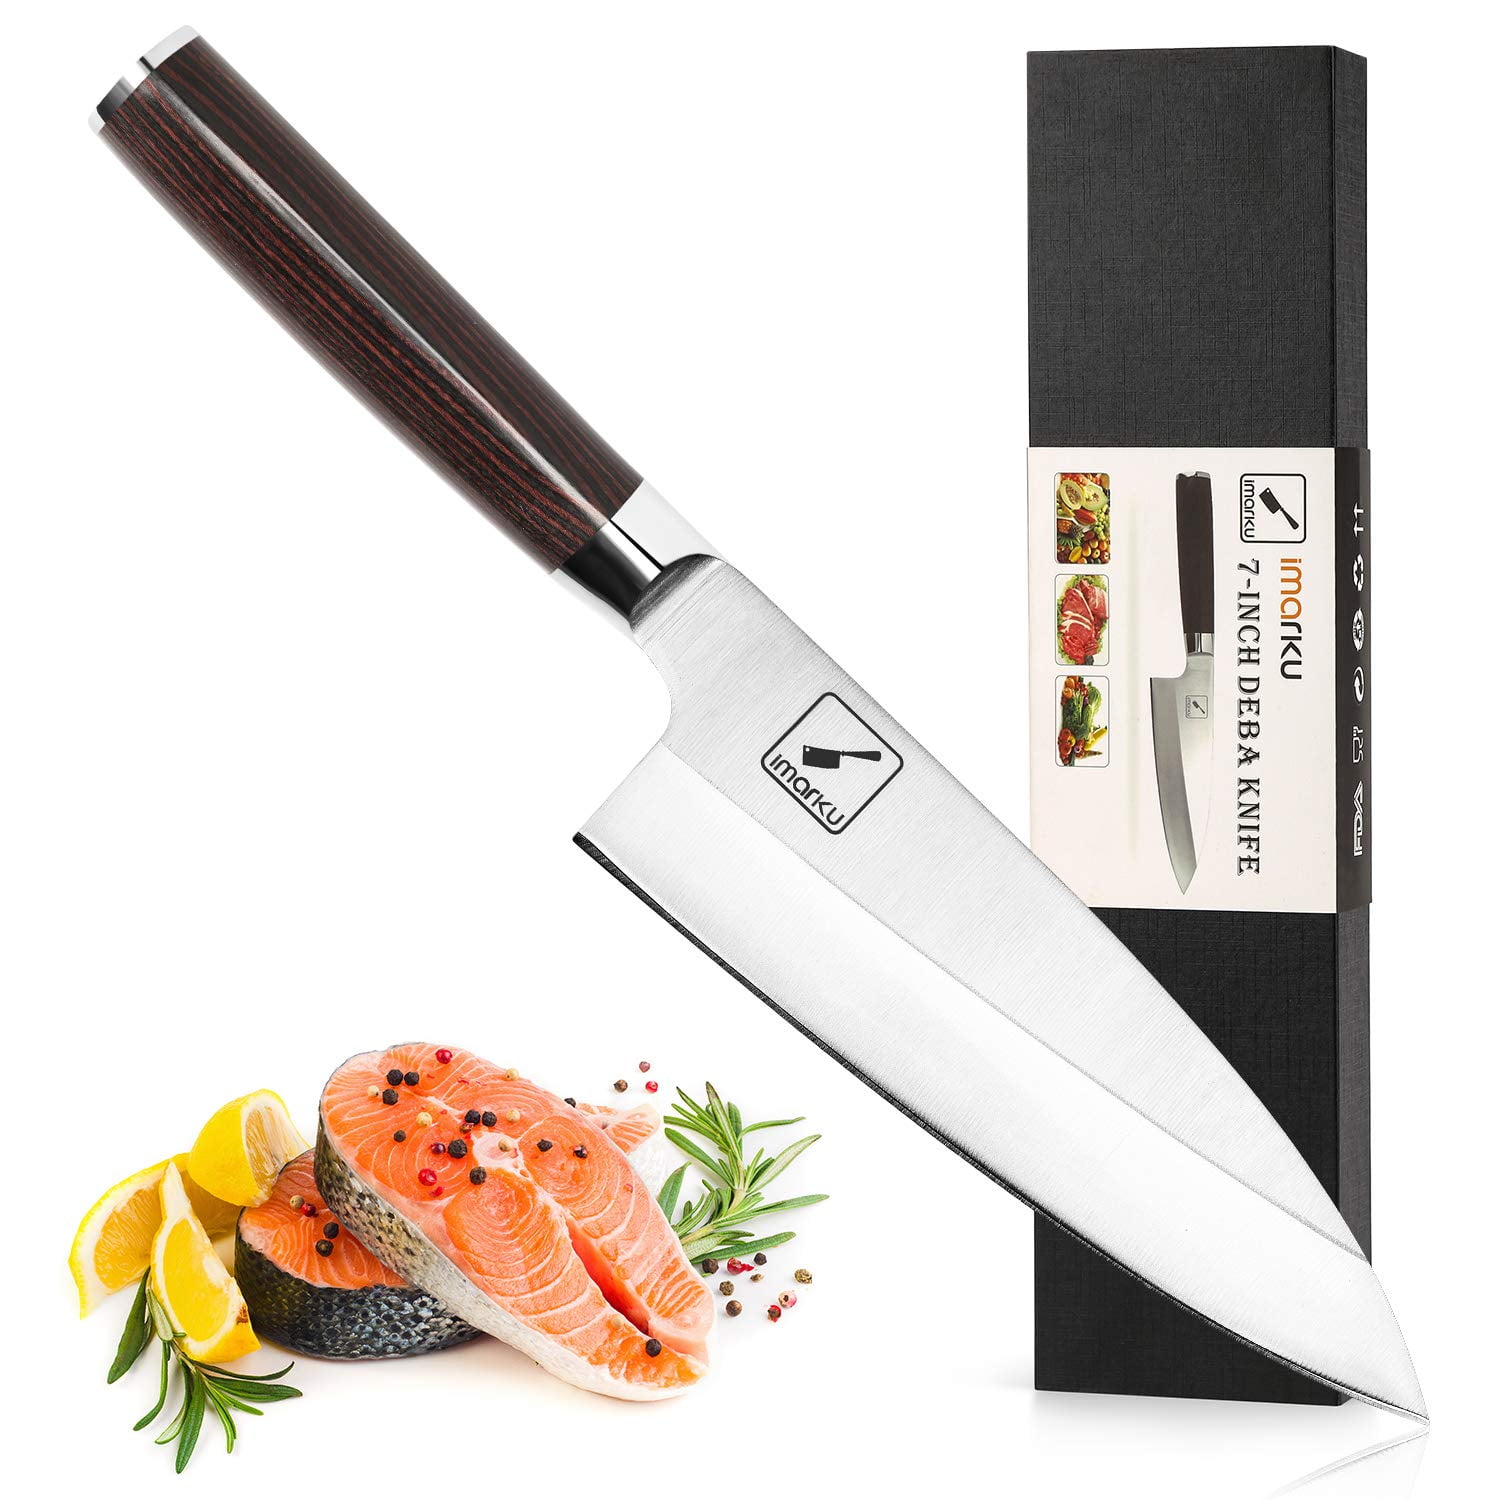  imarku Chef Knife - 8 Inch Pro Kitchen Knife, High Carbon  Stainless Steel EN 1.4116 Japanese Knife, Chef's Knives with Ergonomic  Handle, Single Edge Ultra Sharp Knife, Unique Gifts for Men